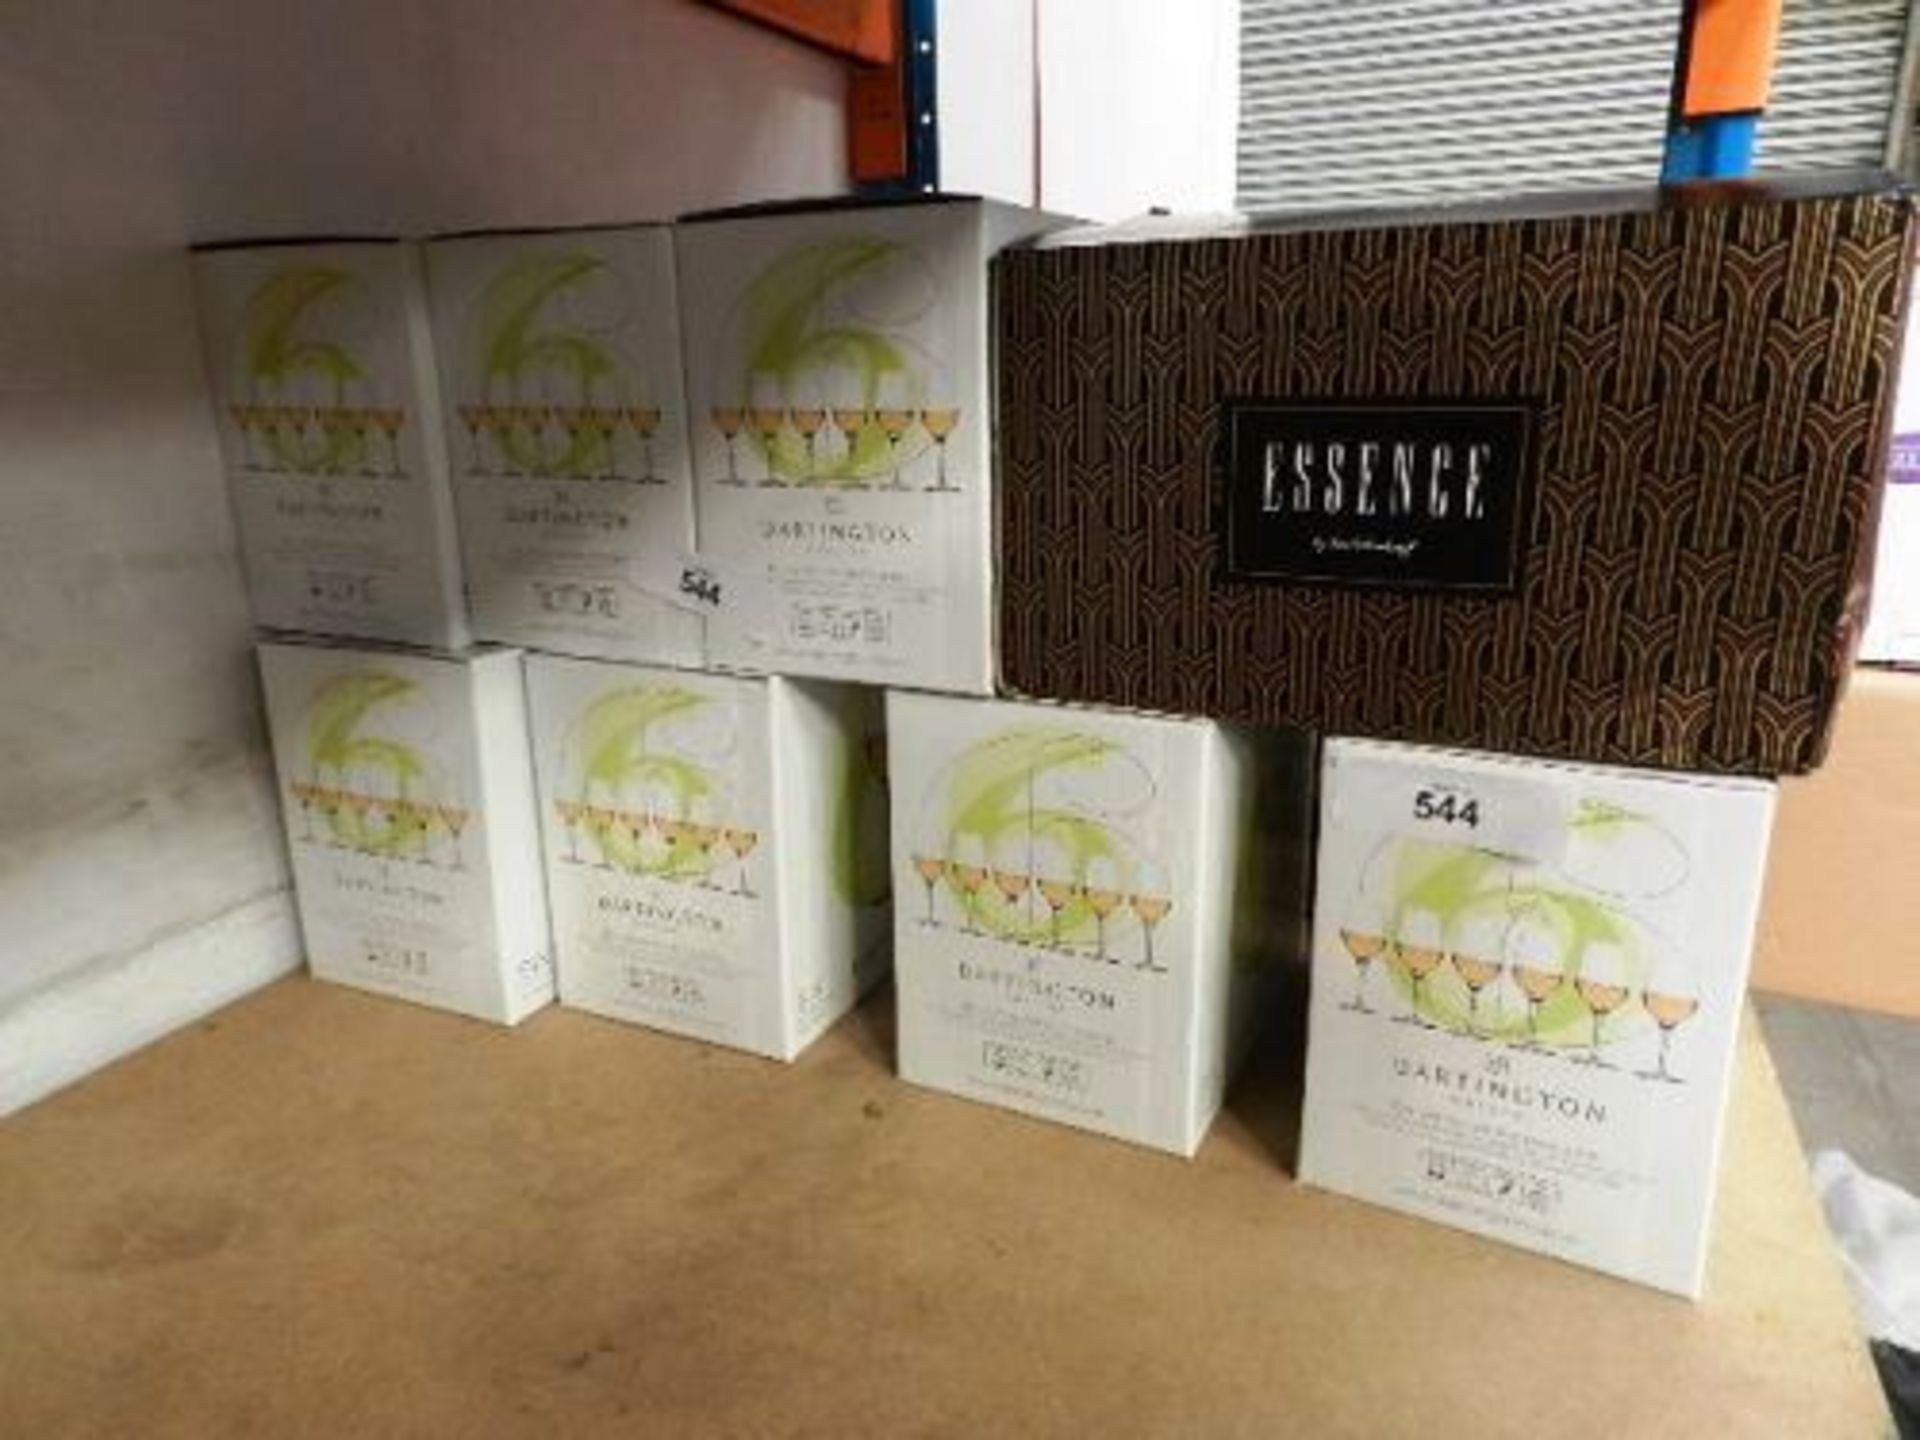 7 x boxes of 6 Dartington white wine glasses, RRP £44.00 per box, together with 1 x box of 6 Bar